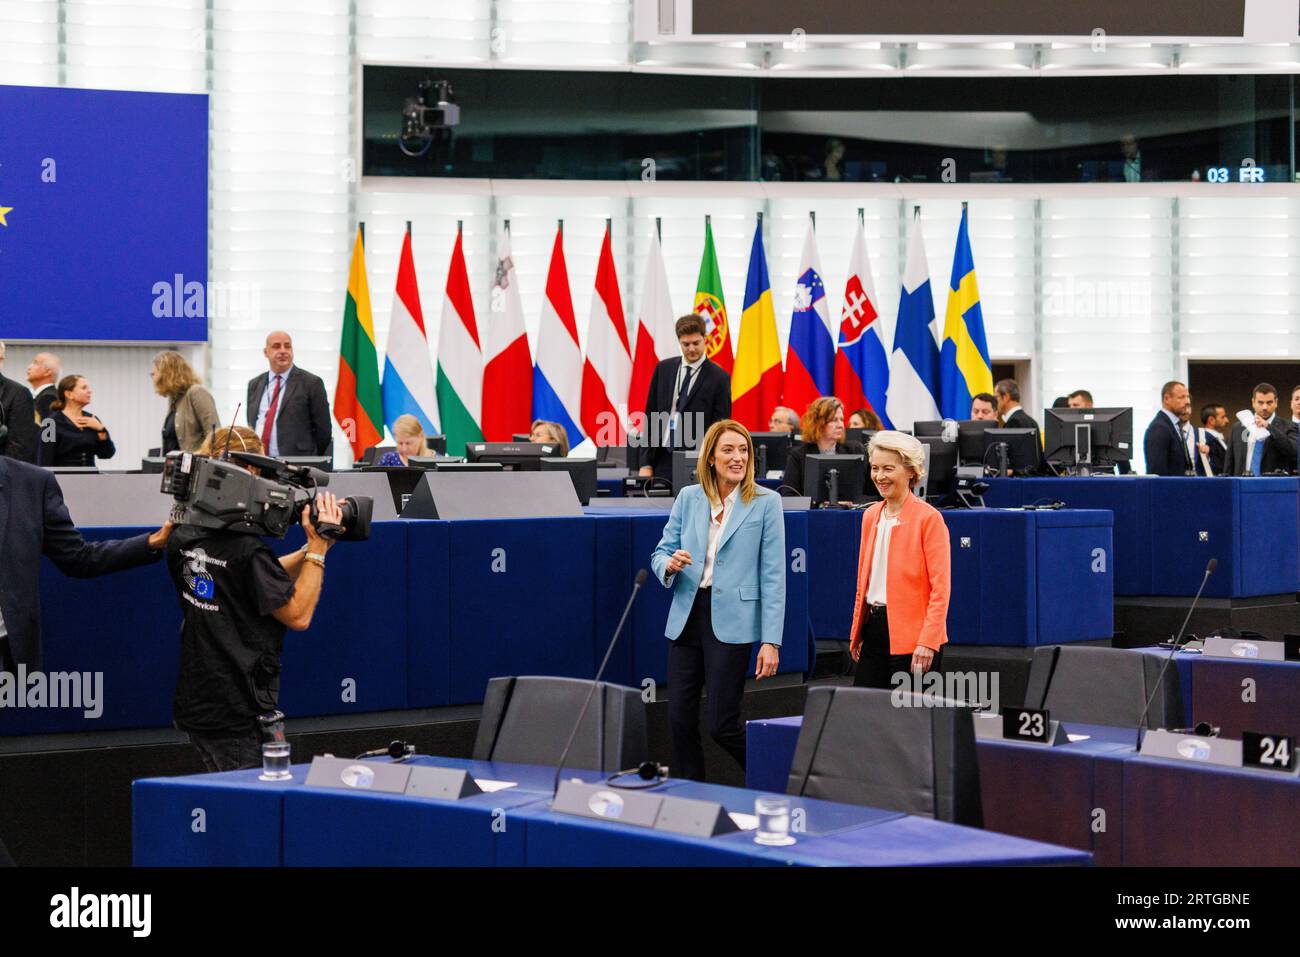 13 September 2023, France, Straßburg: Roberta Metsola (Partit Nazzjonalista), President of the European Parliament, and Ursula von der Leyen (CDU, EPP Group) walk together through the European Parliament building. In her State of the Union 2023 speech, Commission President von der Leyen will outline the priorities and flagship initiatives for the coming year. It is the last speech of this legislative period in the run-up to the 2024 European elections. Photo: Philipp von Ditfurth/dpa Stock Photo